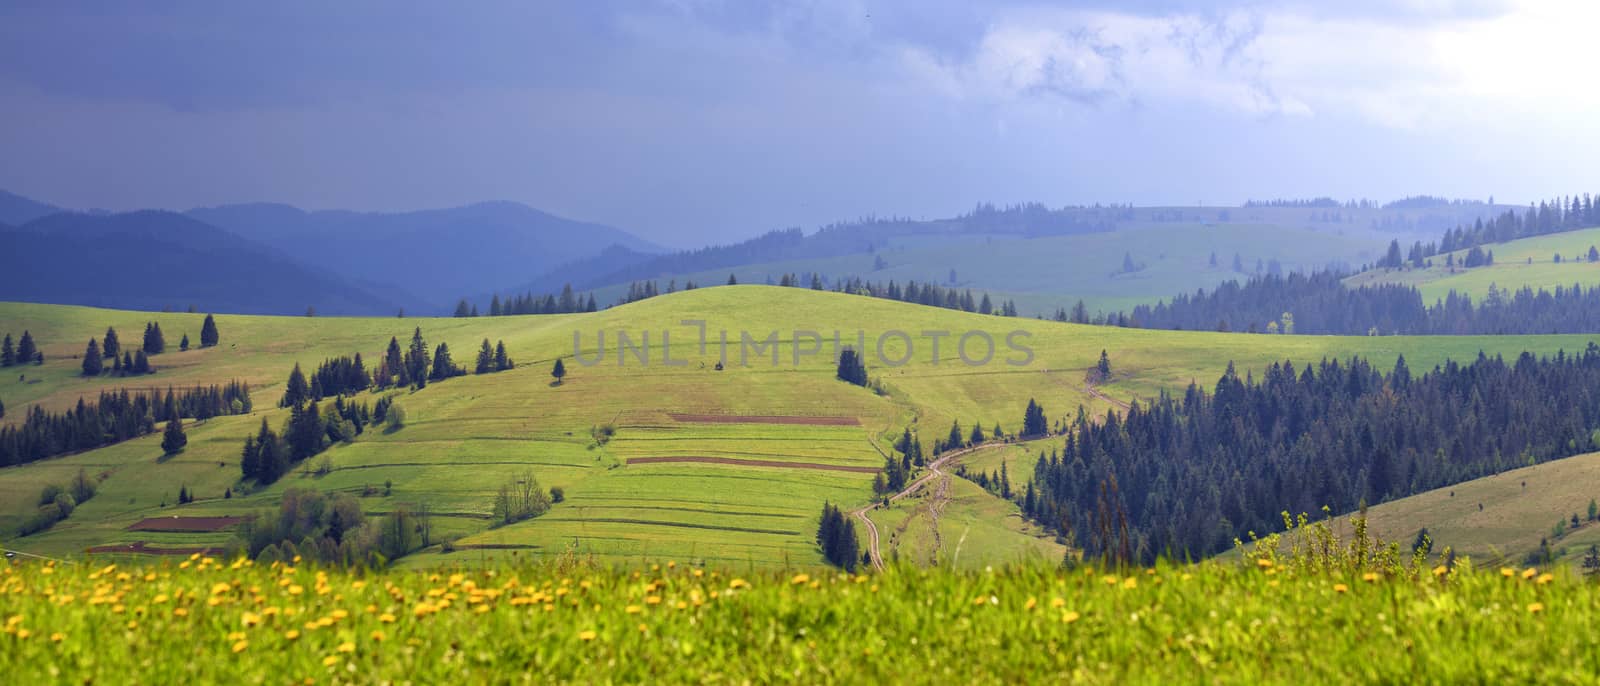 Mixed grass and wildflowers in blur in the foreground against the backdrop of the Carpathian mountains and a winding rural road lit by the summer sun.